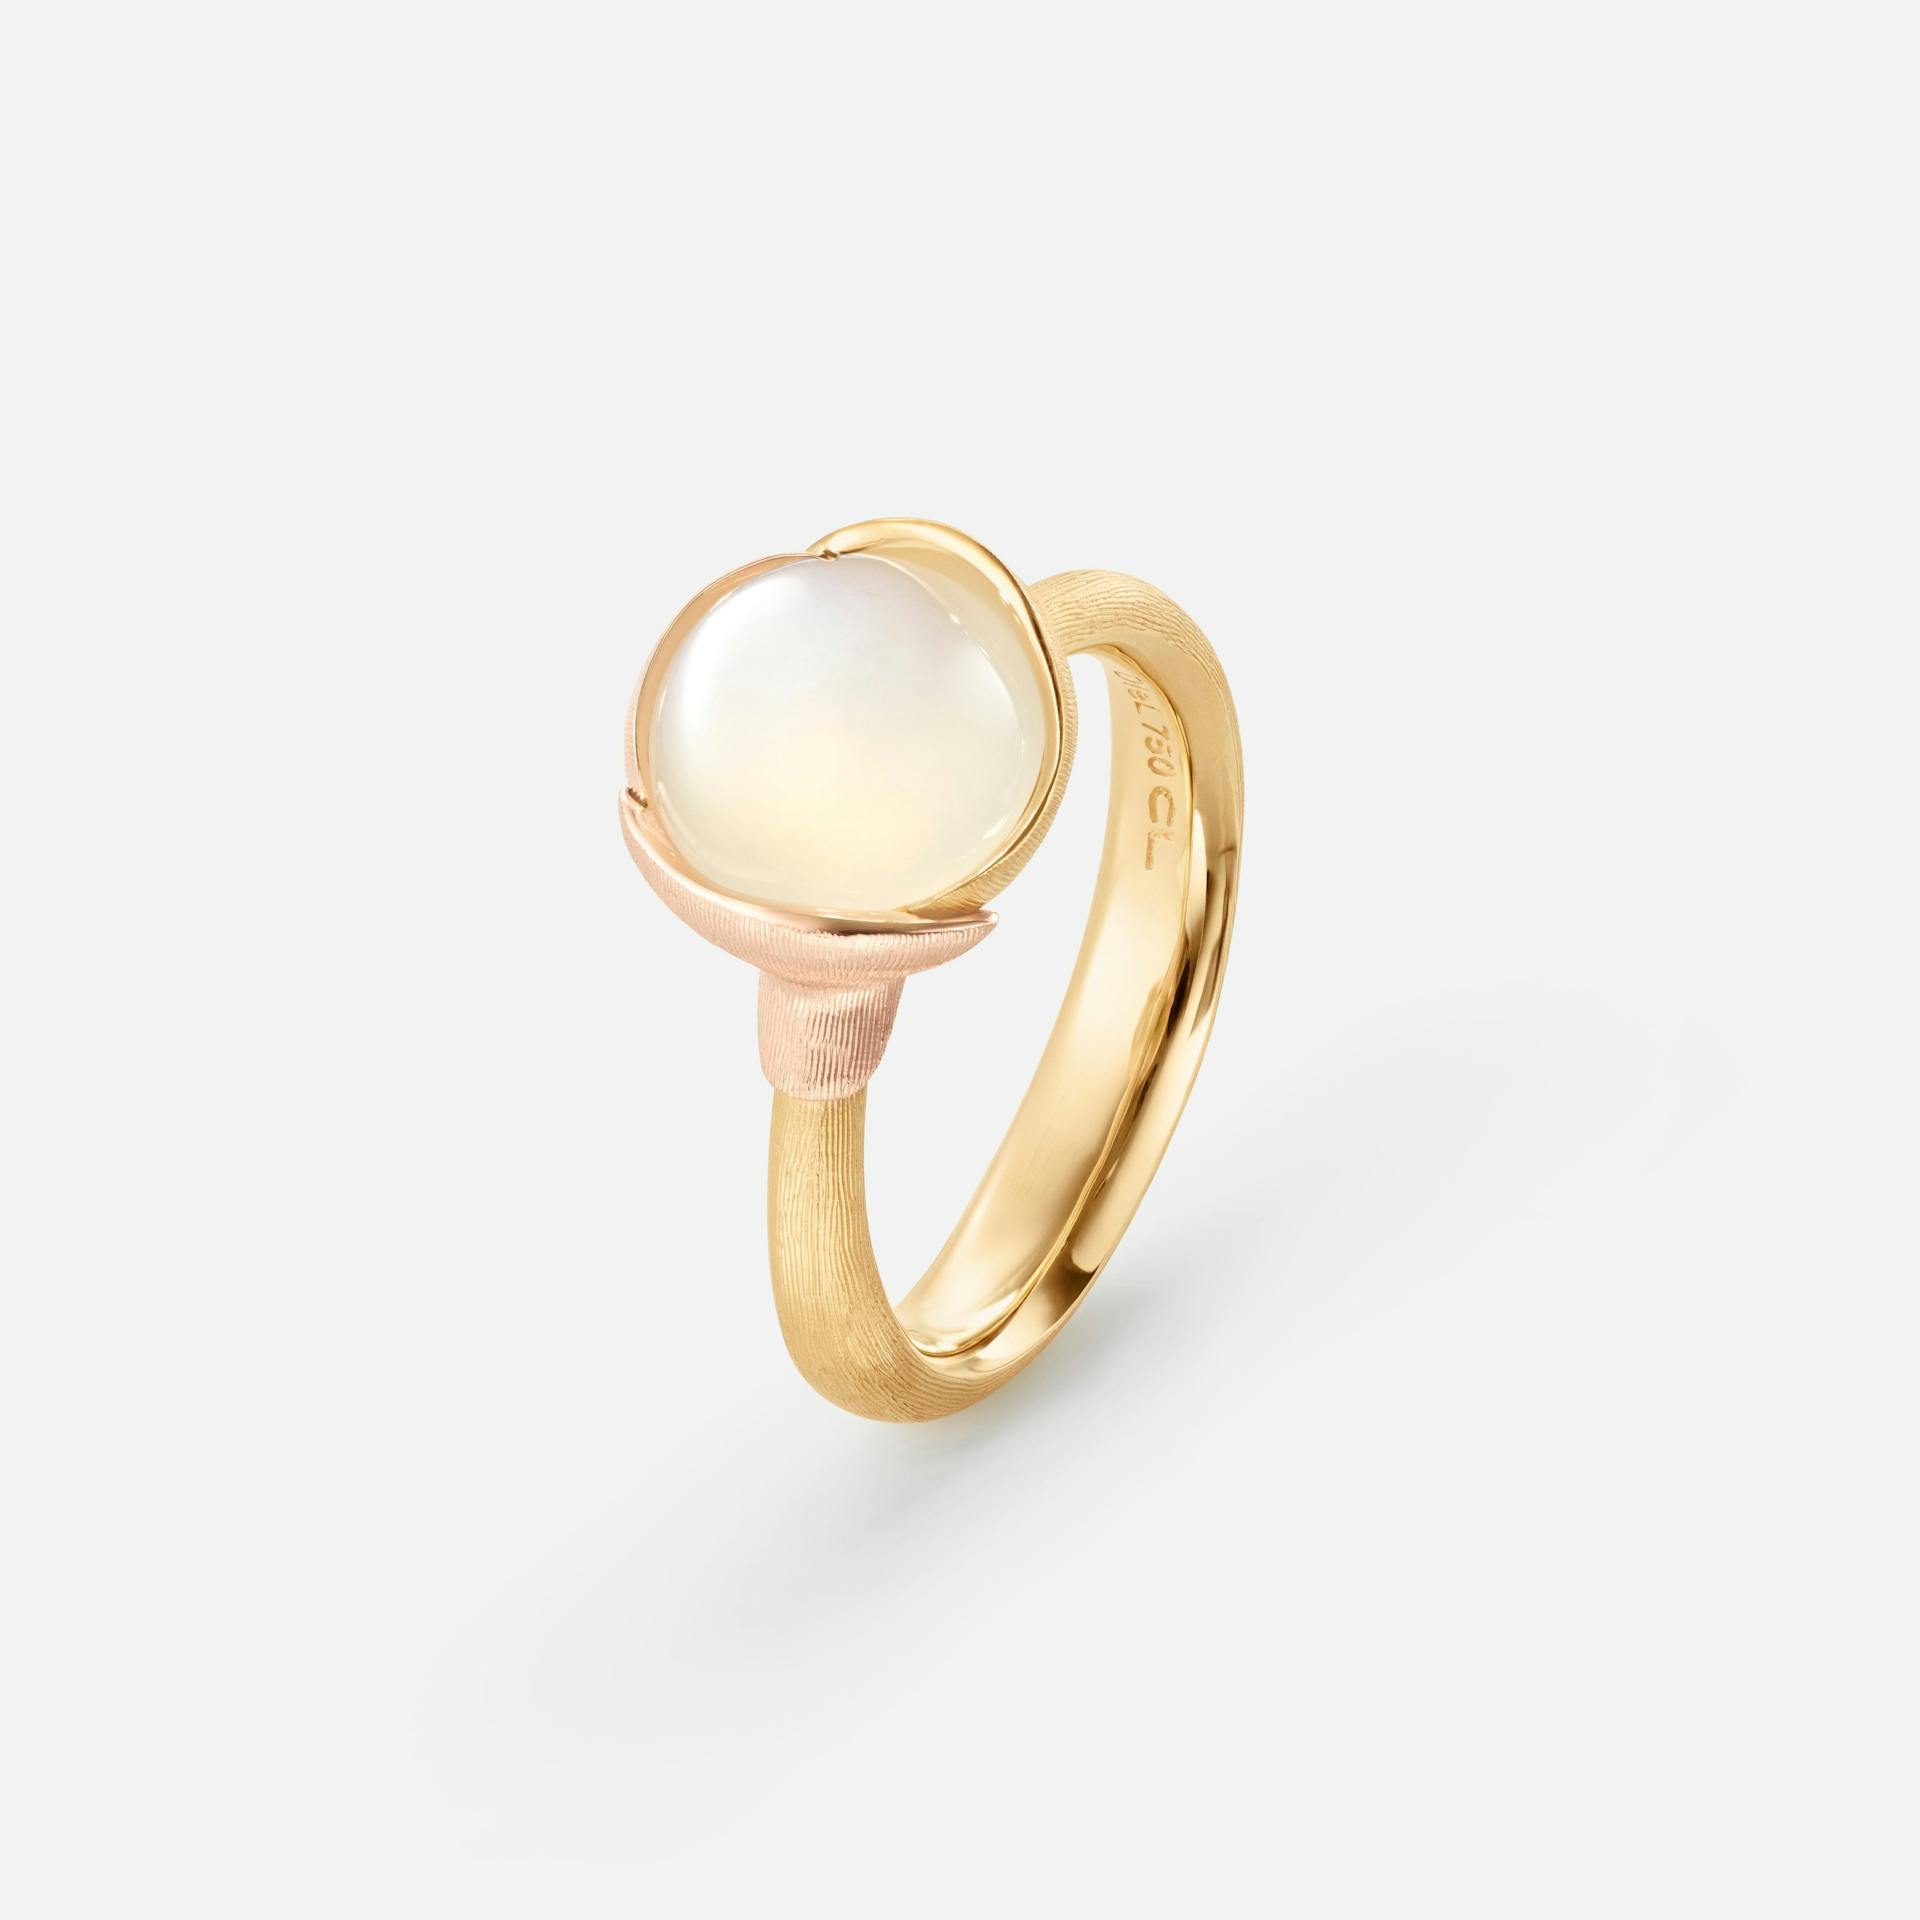 Lotus Ring size 1 in Yellow and Rose Gold  with White Moonstone  |  Ole Lynggaard Copenhagen